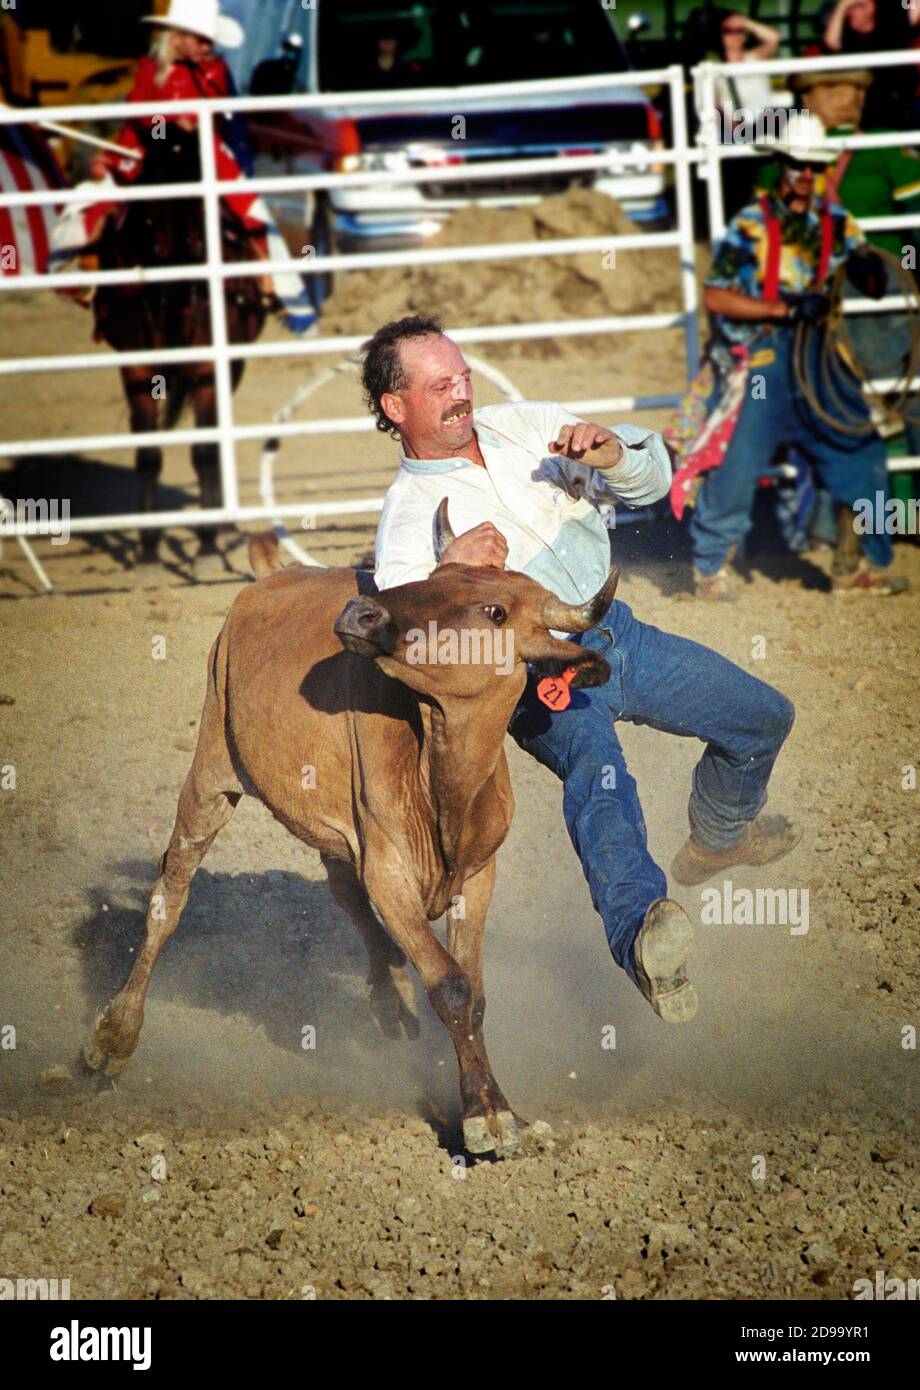 Rodeo steer wrestling event Stock Photo